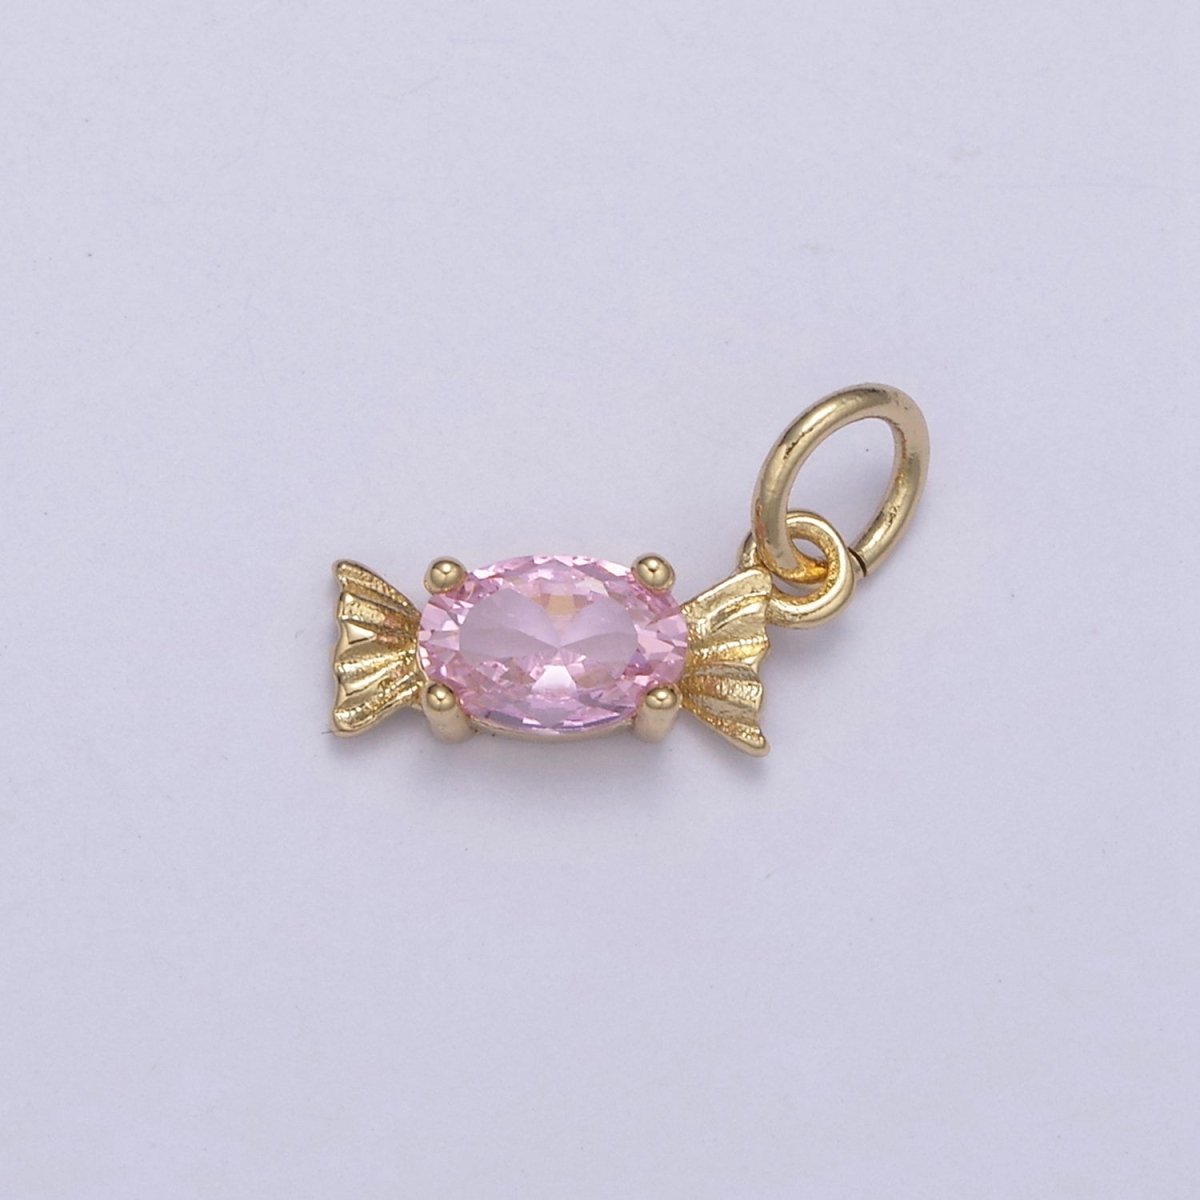 Cubic Candy Charm,14k Gold Filled Candy Pendant Add on Foodie Jewelry Making Supplies N-375 - N-380 - DLUXCA